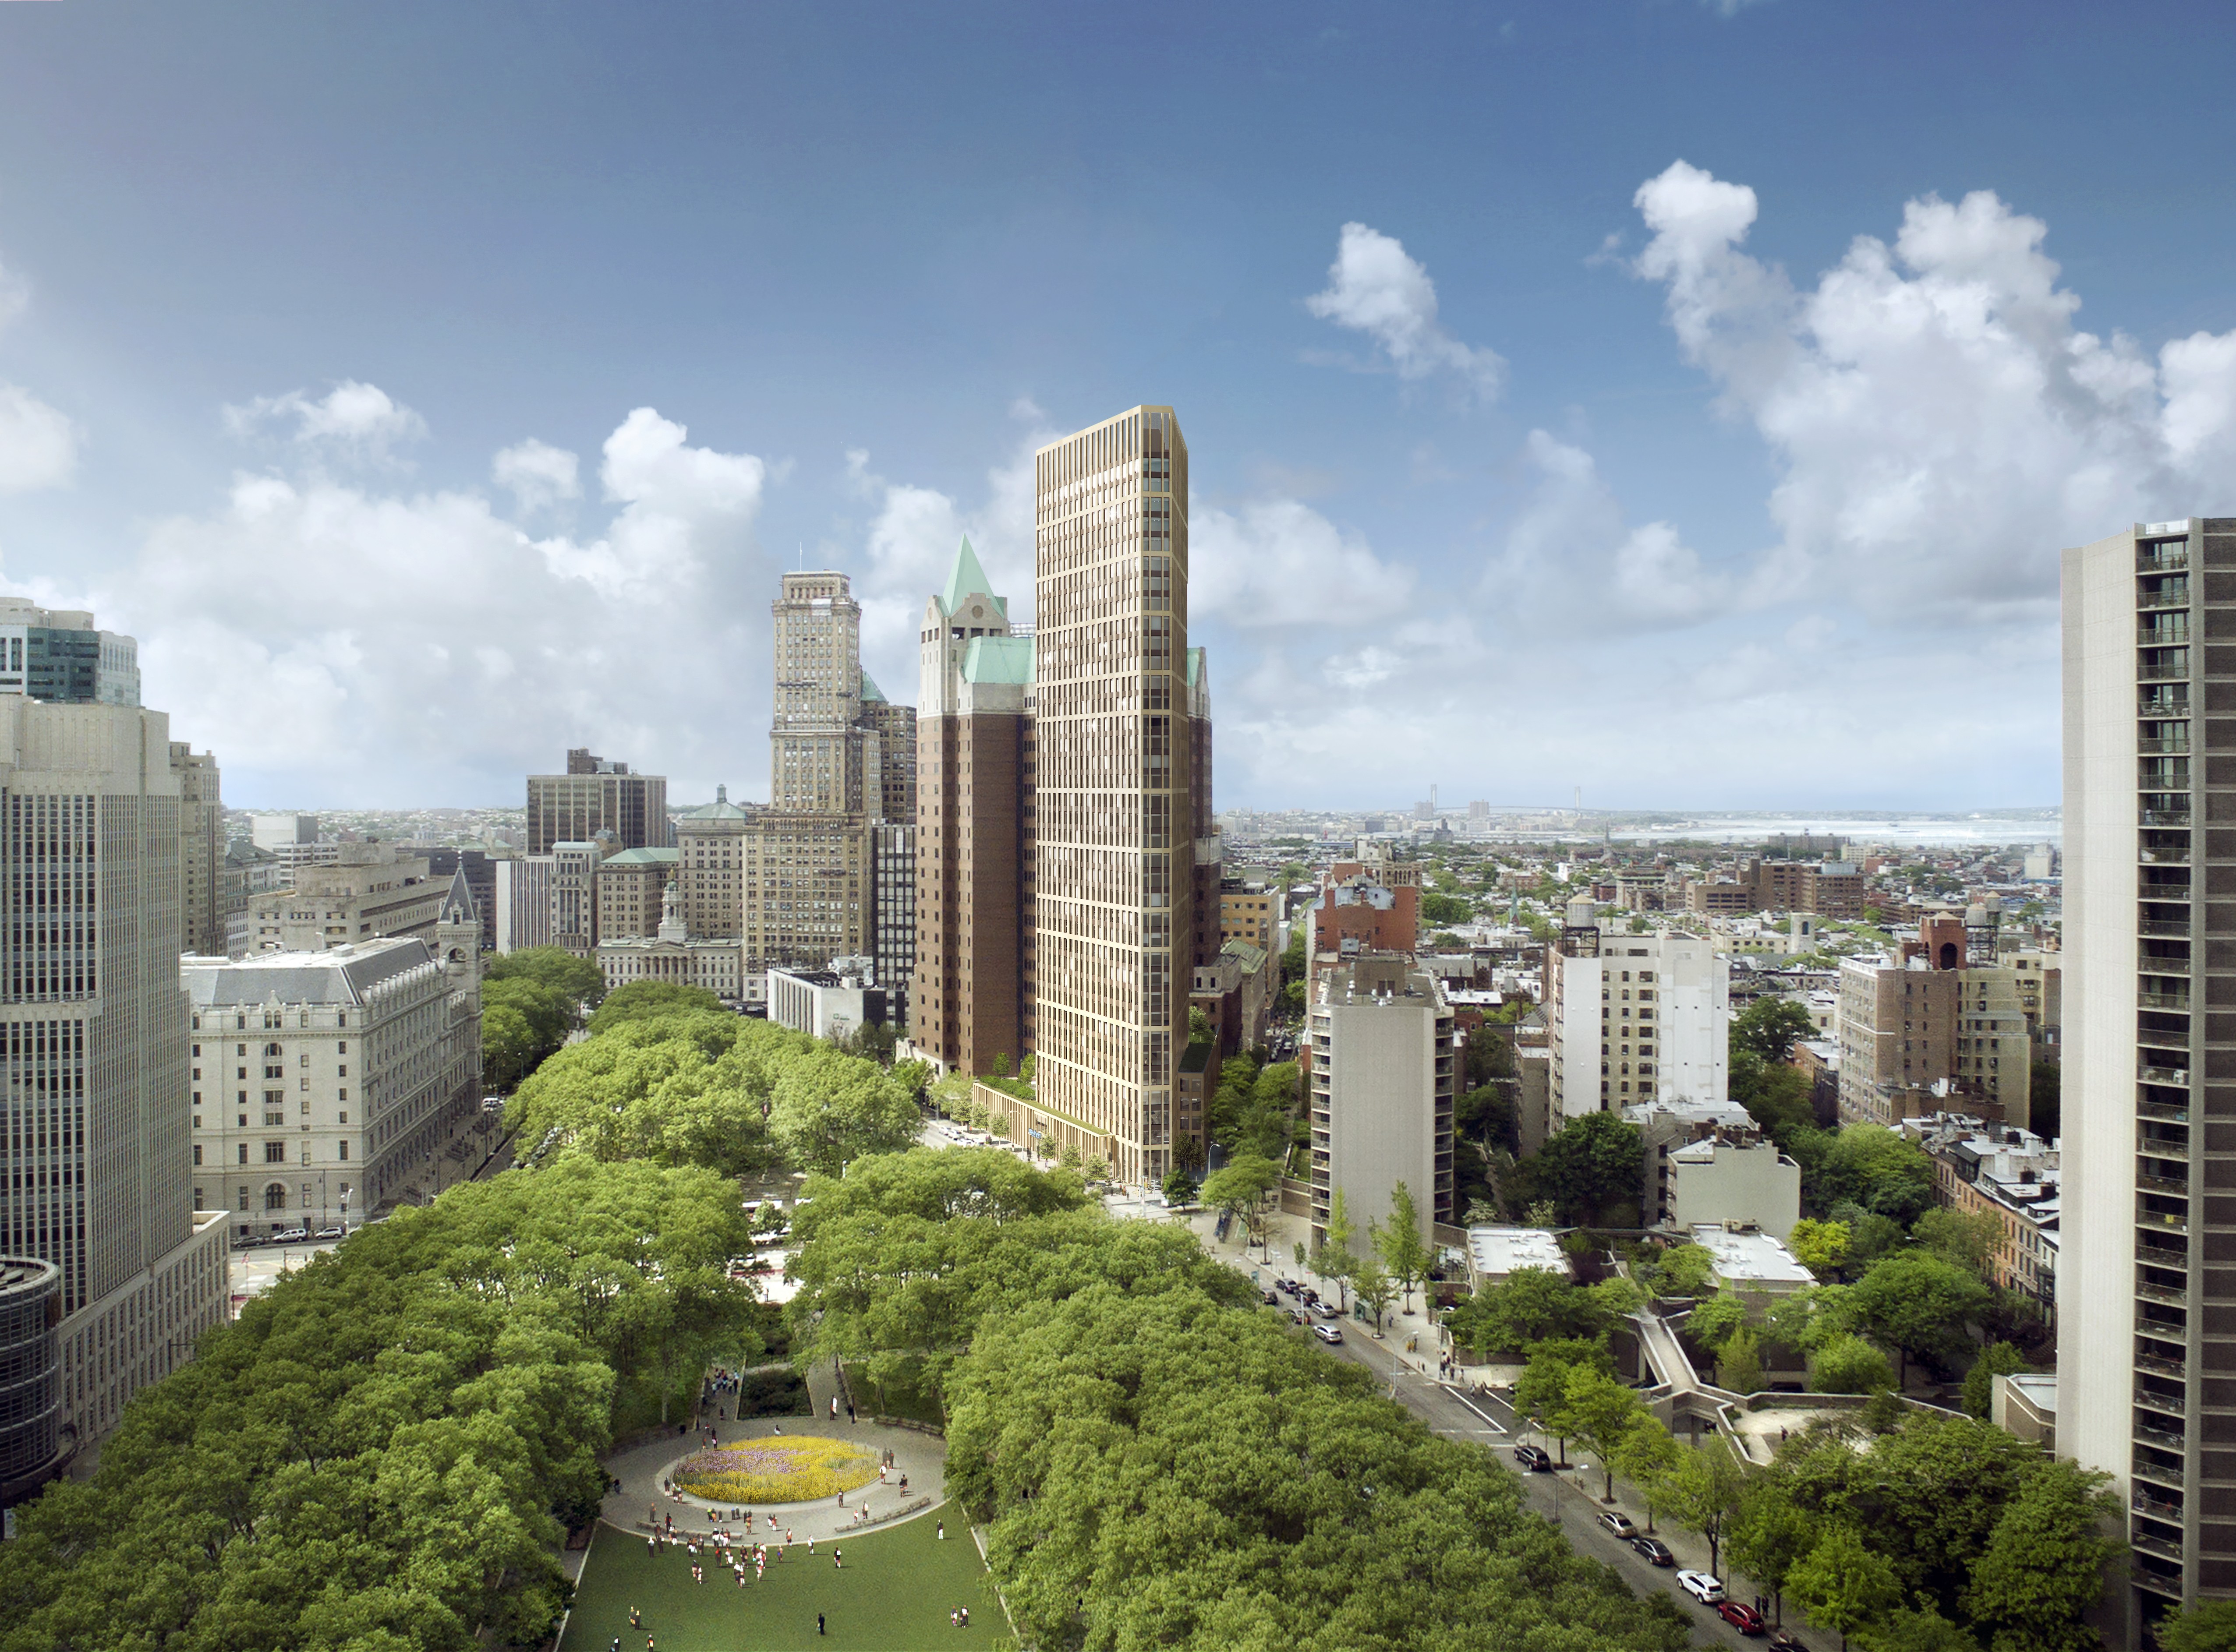 Hudson plans to build a 36-story condo tower (shown center), with some ground floor retail, and 114 units of affordable rentals in Clinton Hill. Rendering courtesy of Marvel Architects